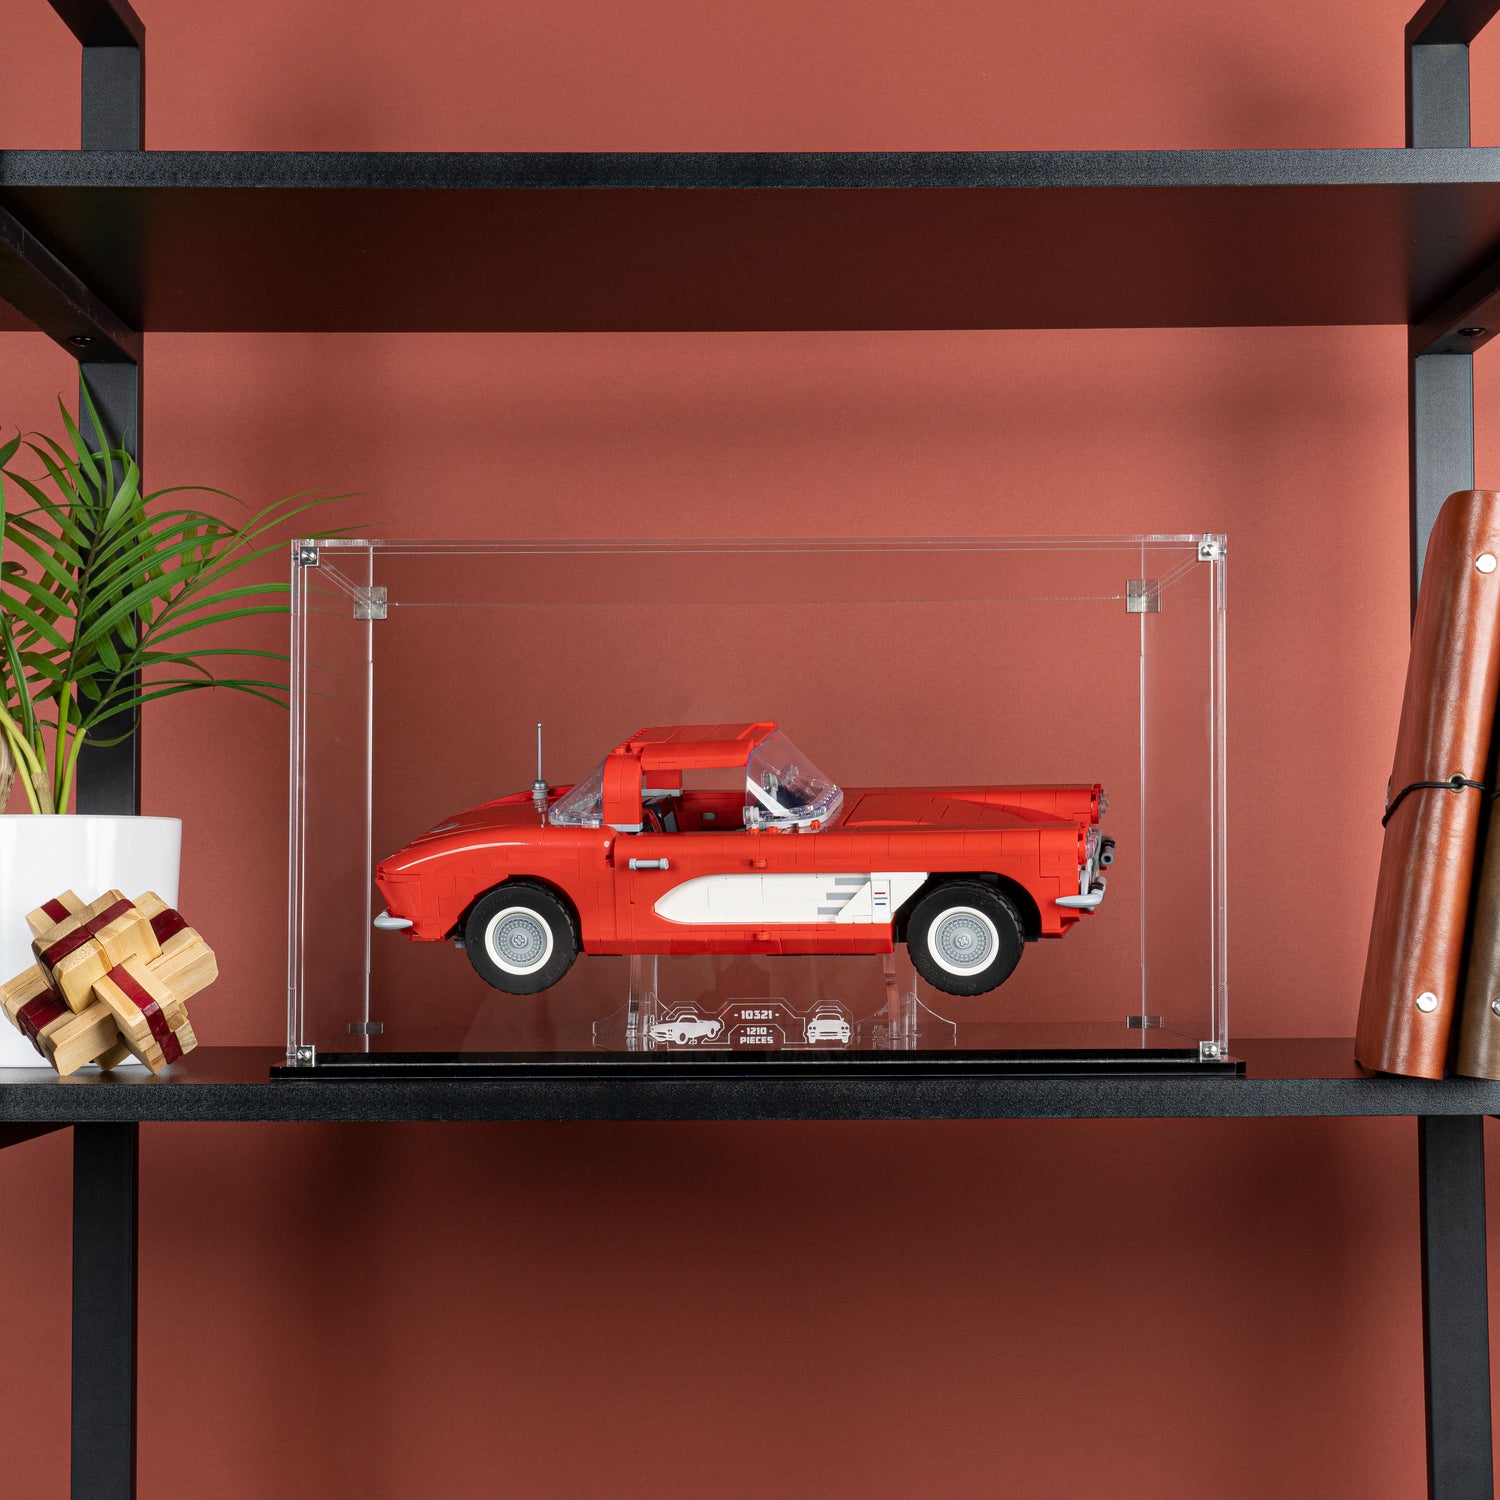 Create your dream display for this classic Corvette with our bespoke clear display case